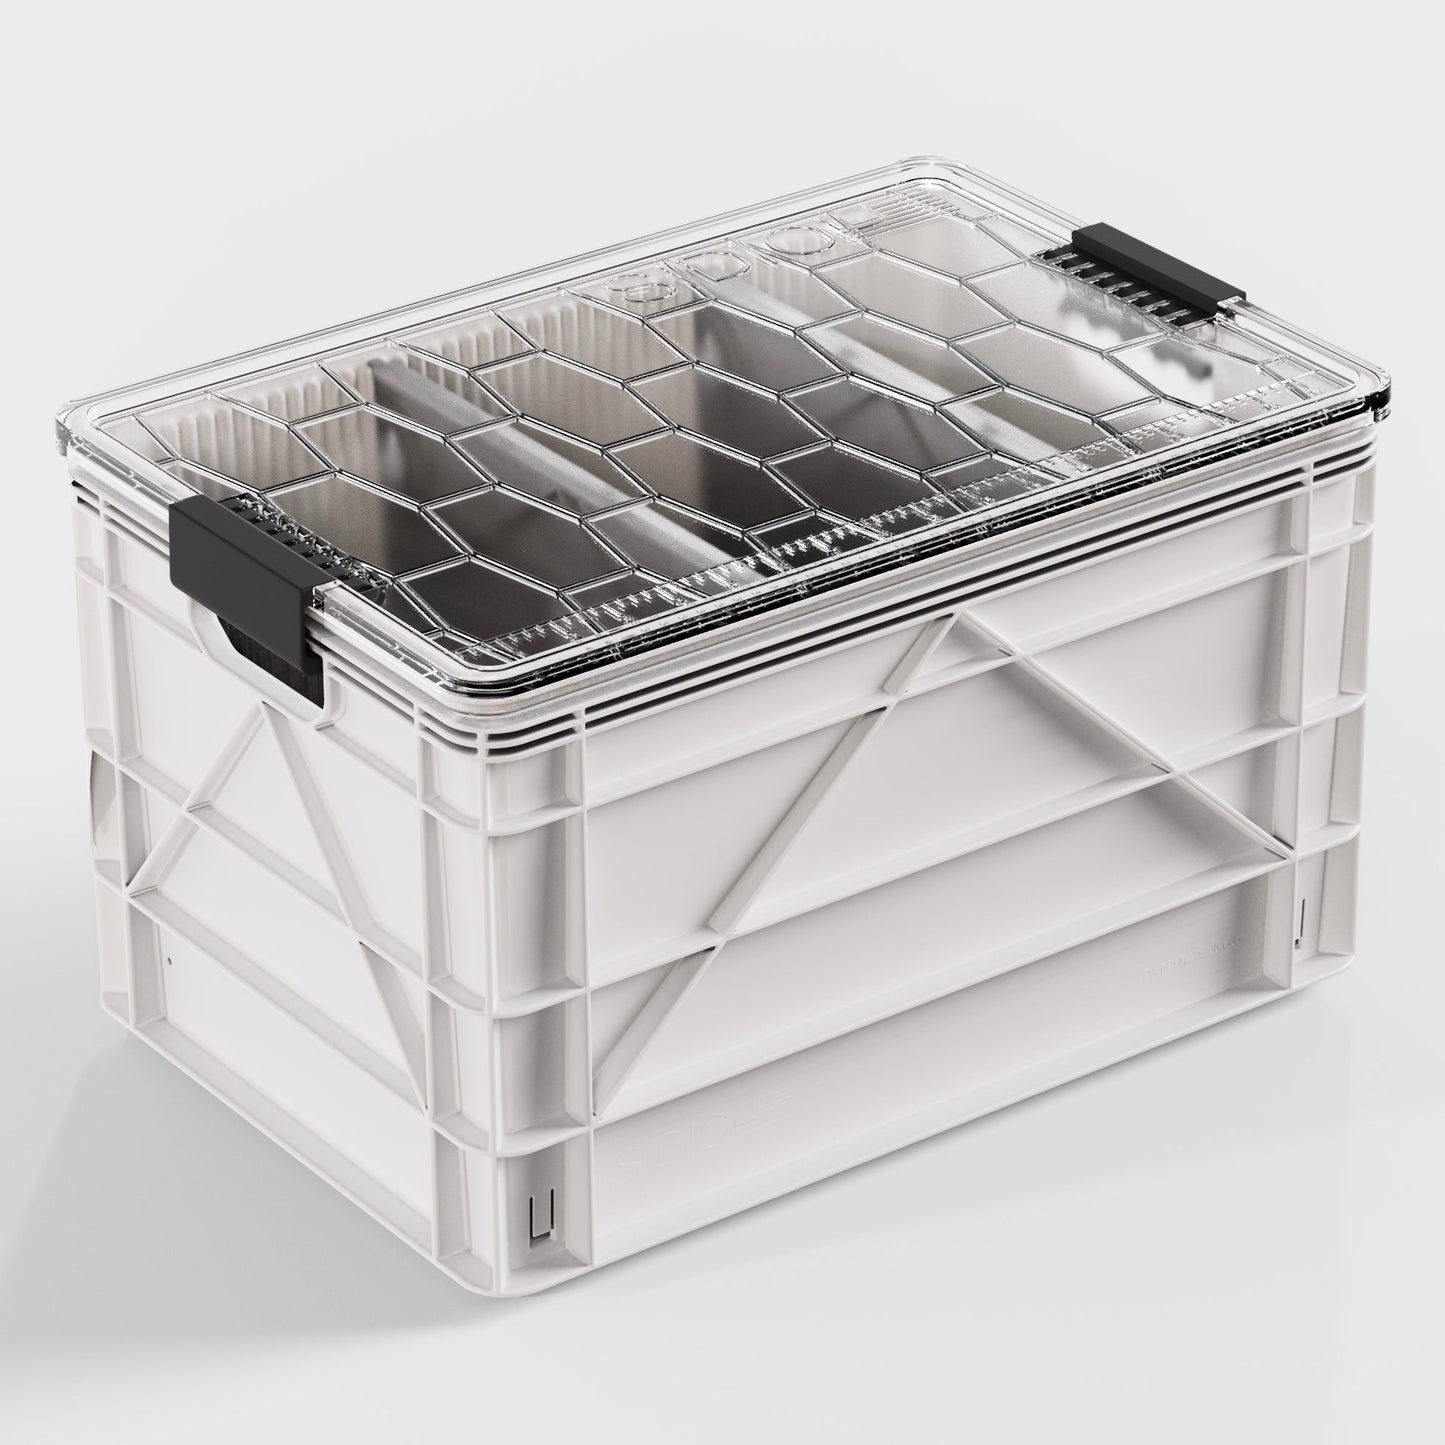 Sidio Crate Lid with Latch